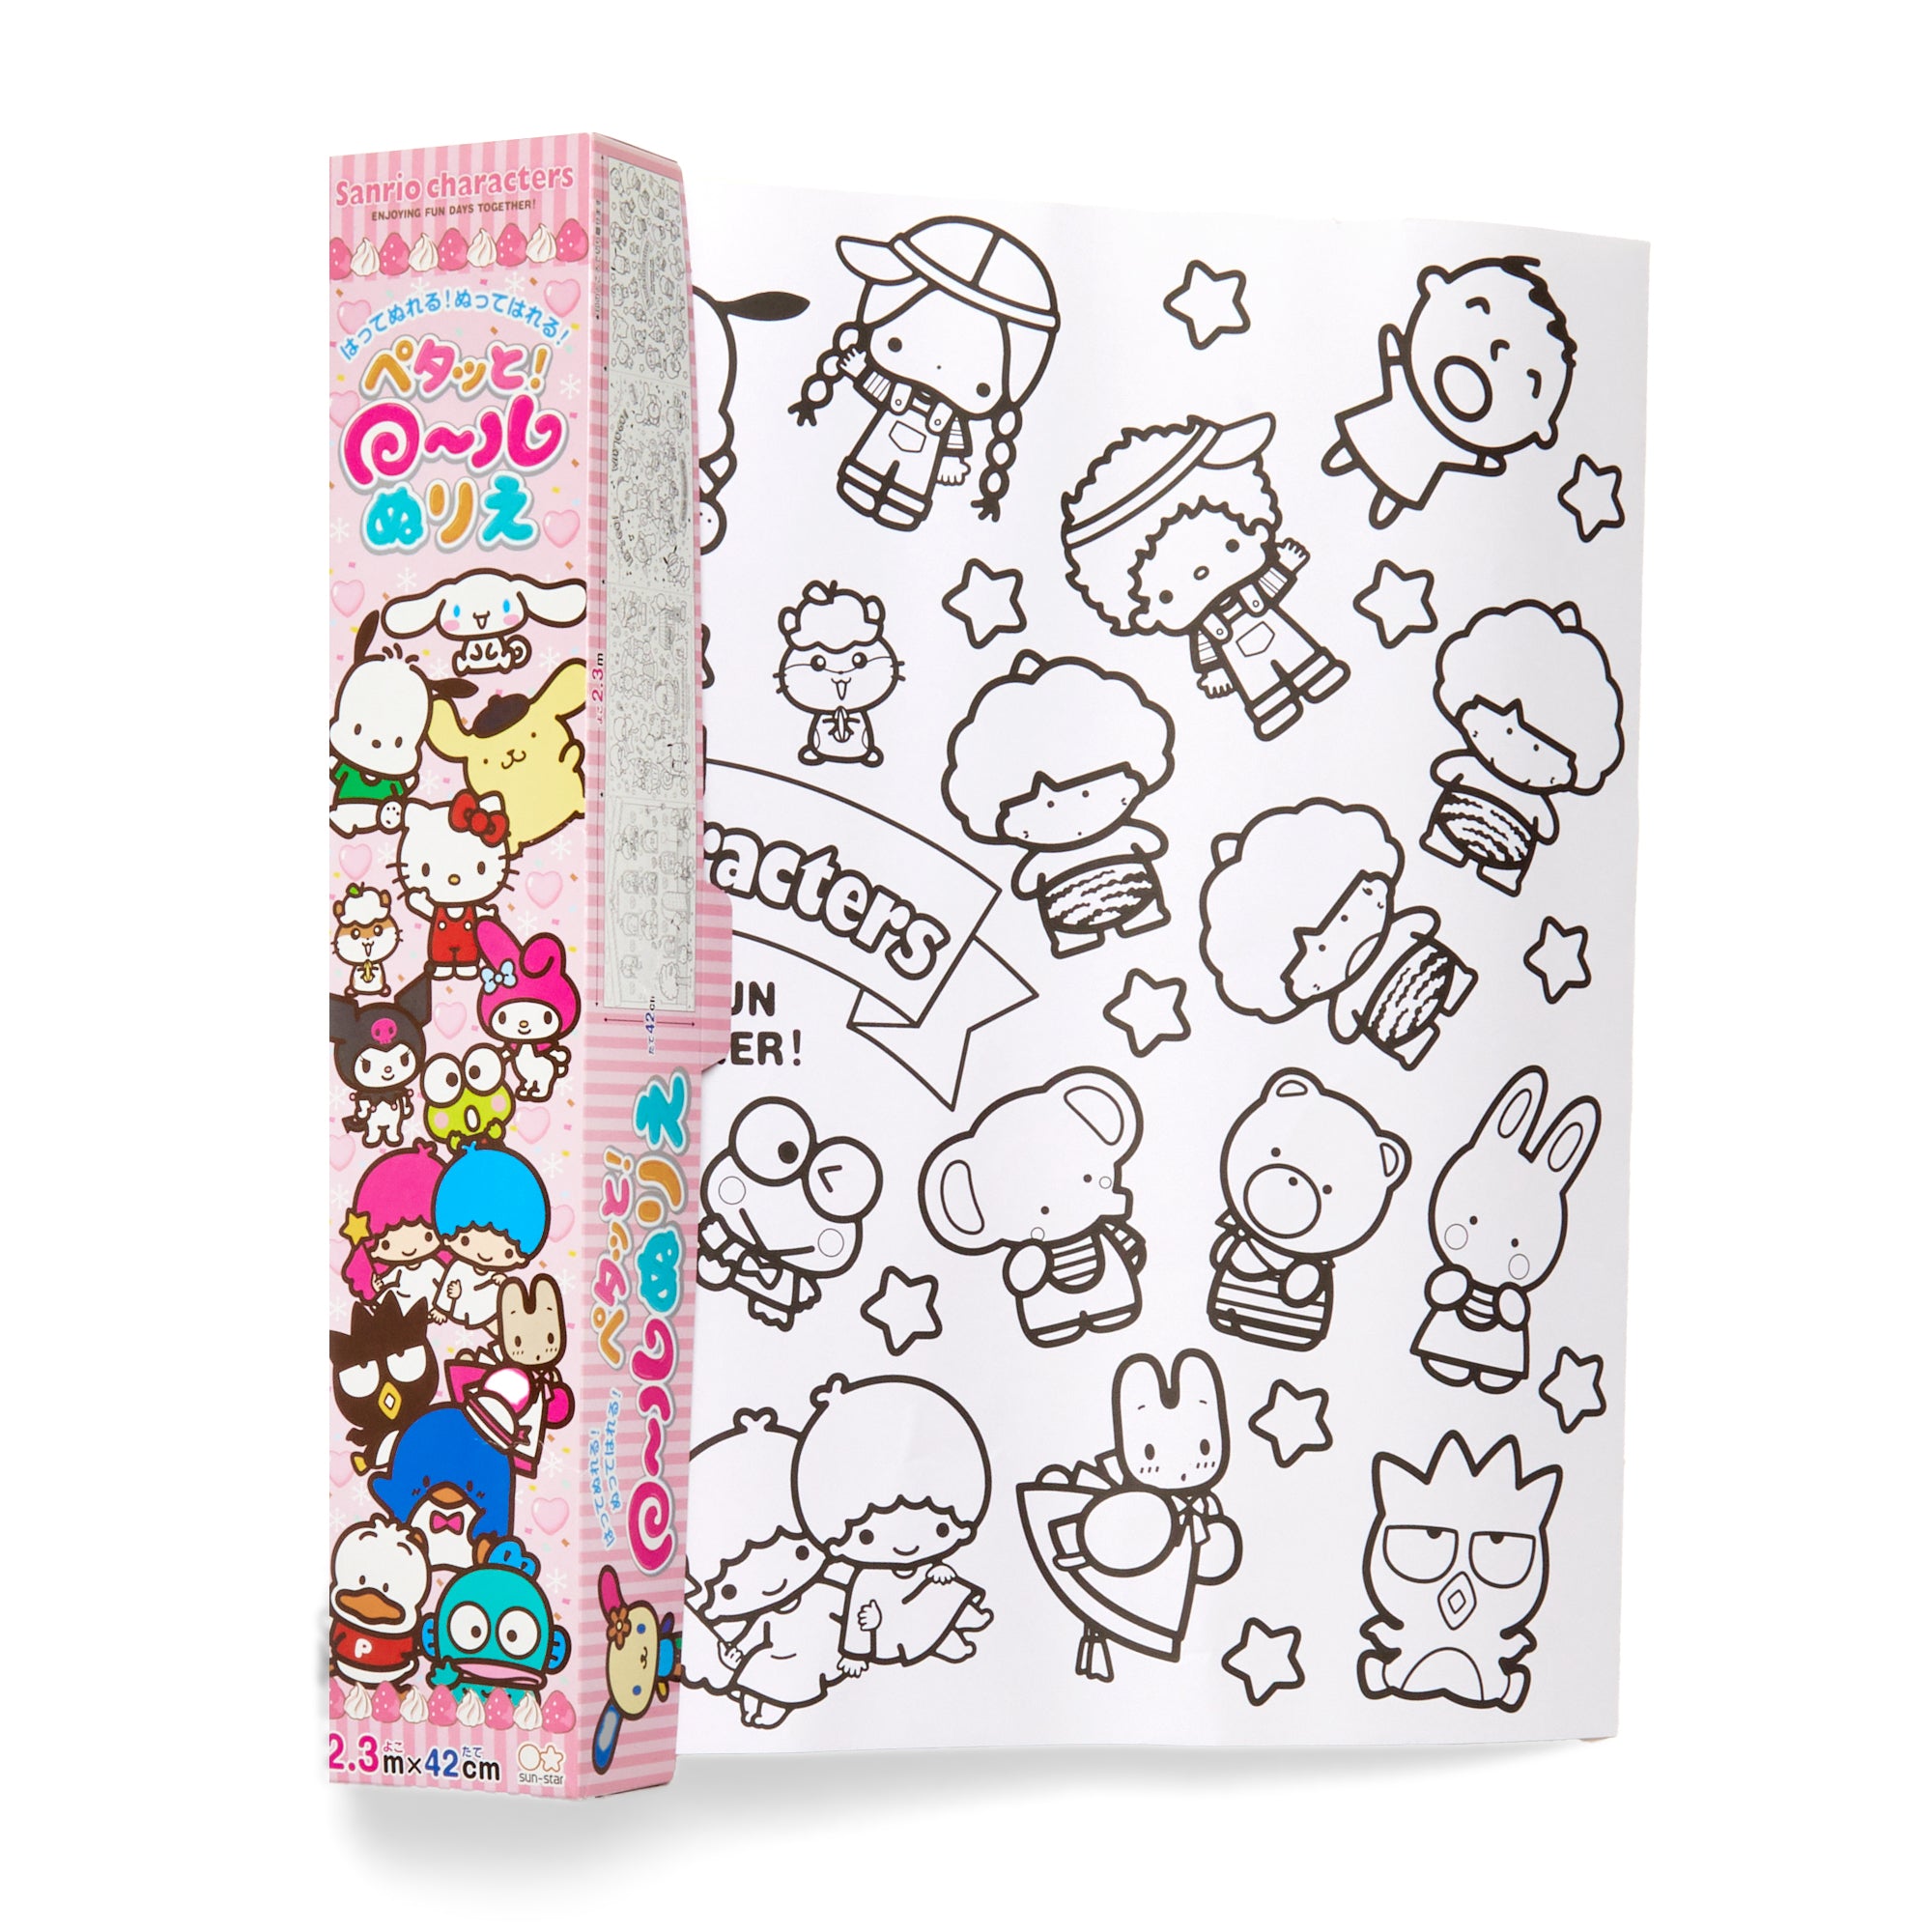 Hello Kitty & Friends Coloring Pages Roll Media Japan Original   